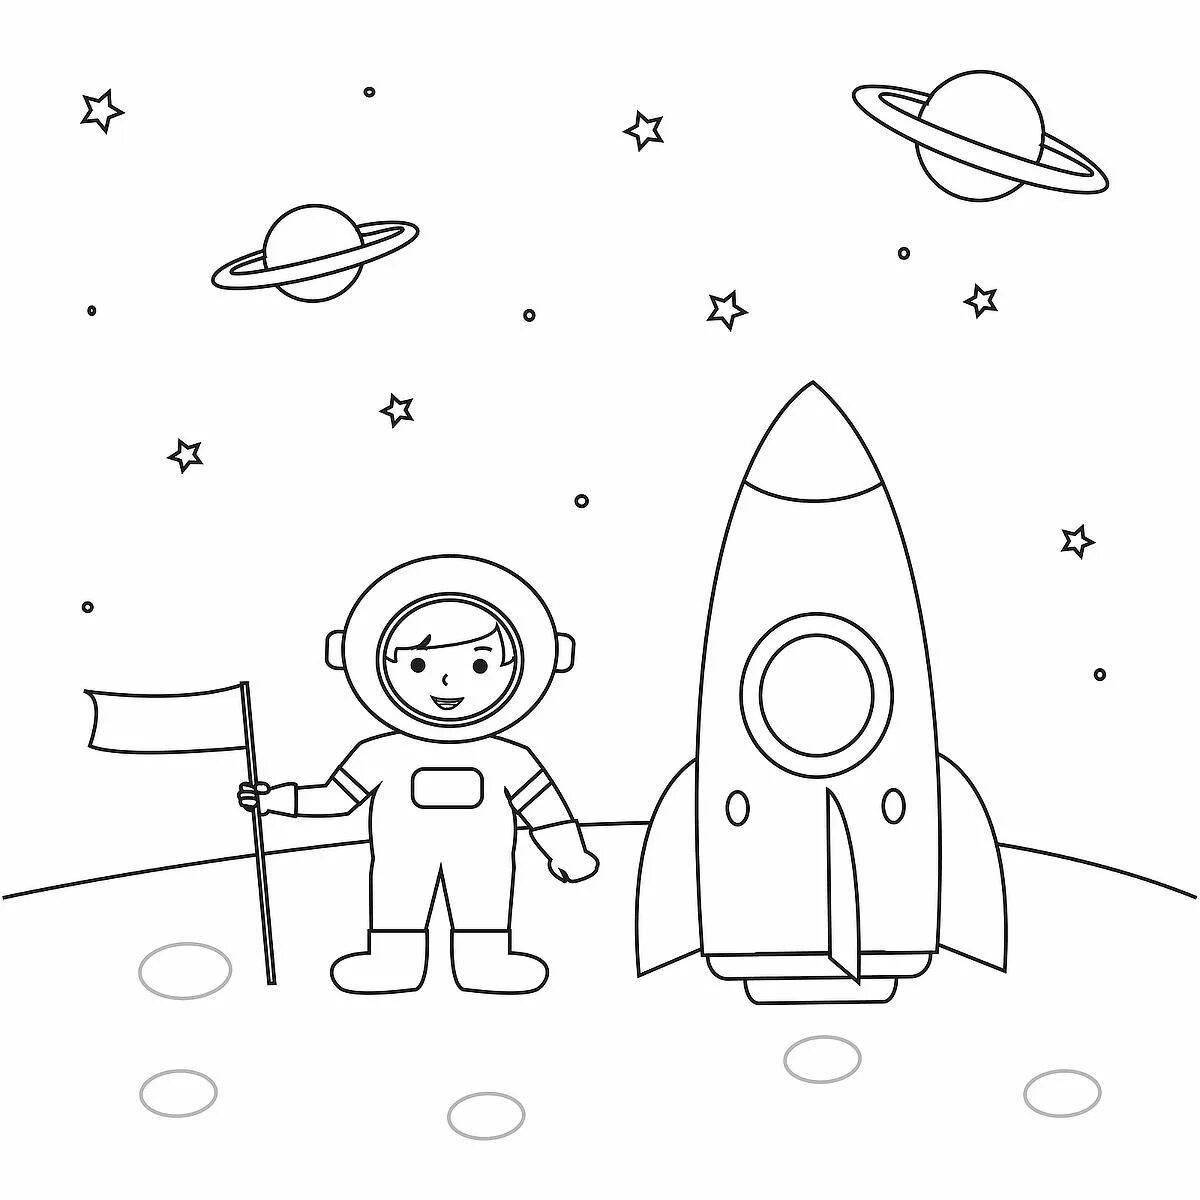 Impressive astronaut with space station coloring book